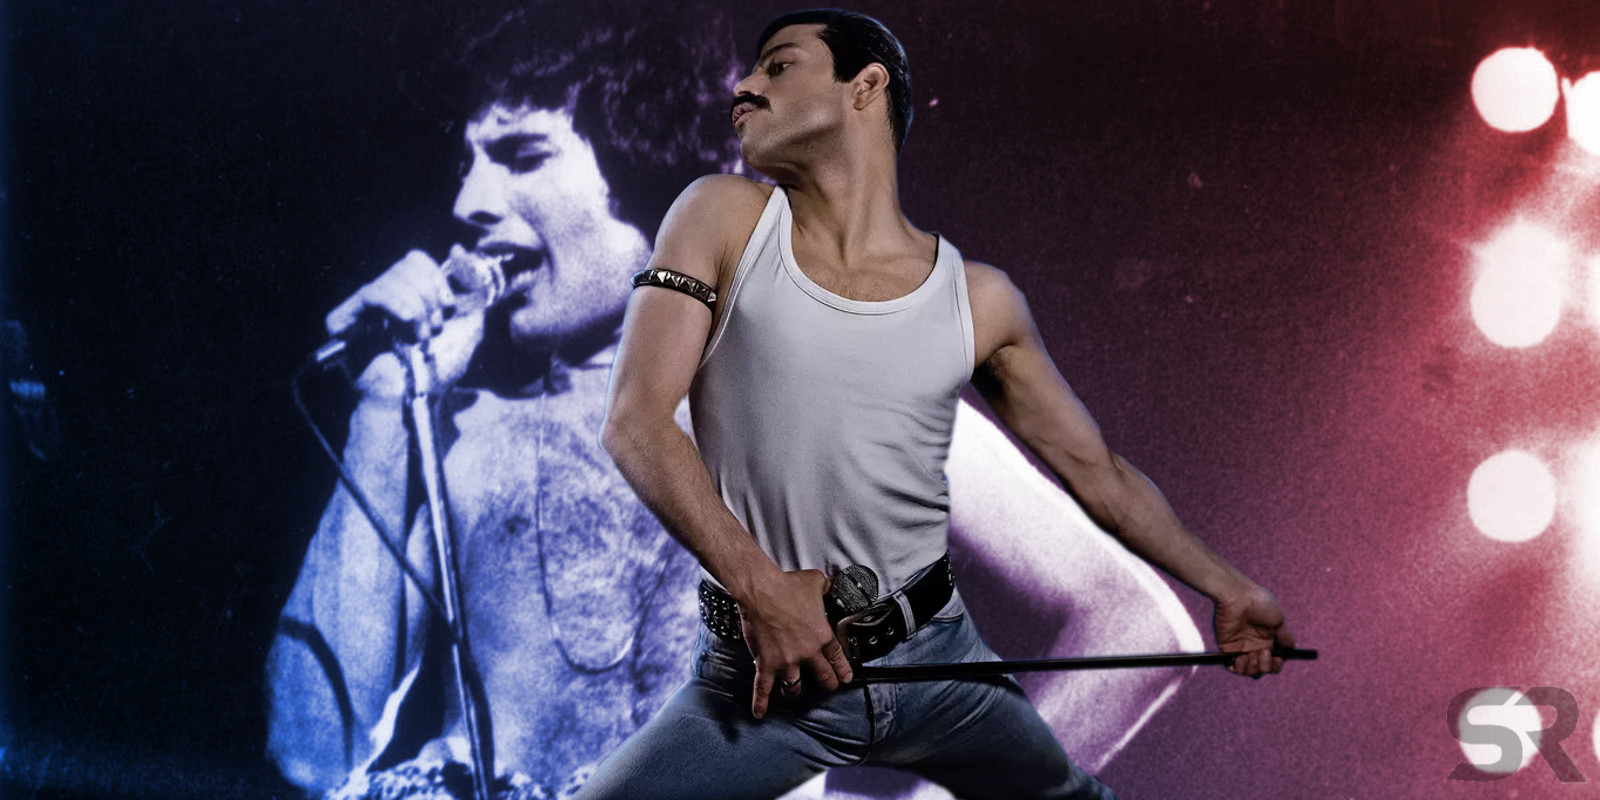 Queen movie “Bohemian Rhapsody” removes important gay scenes for Chinese audiences